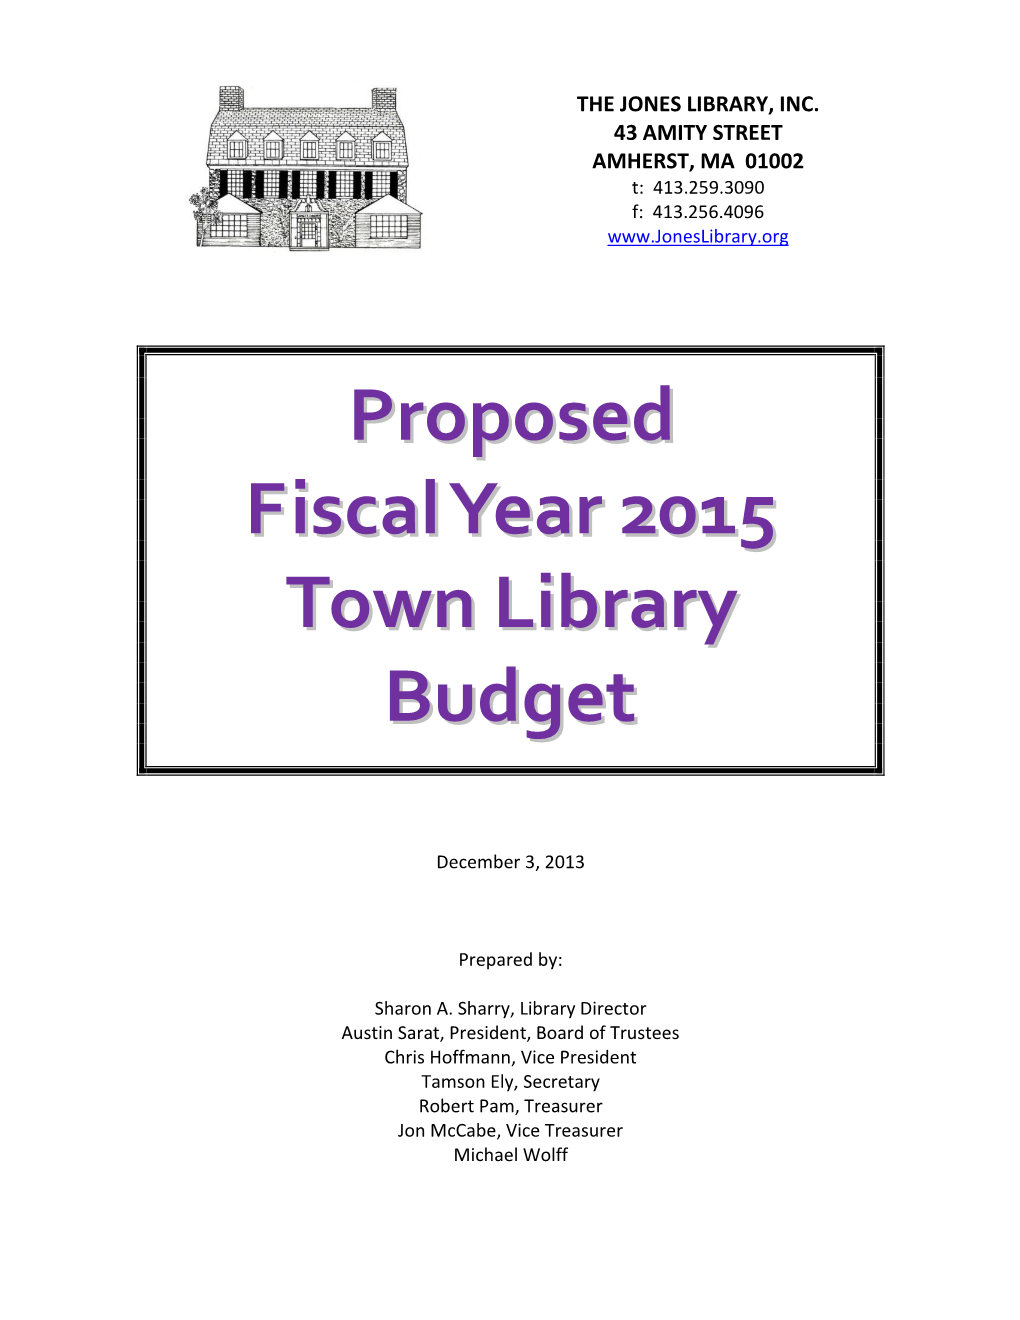 Proposed FY2015 Budget